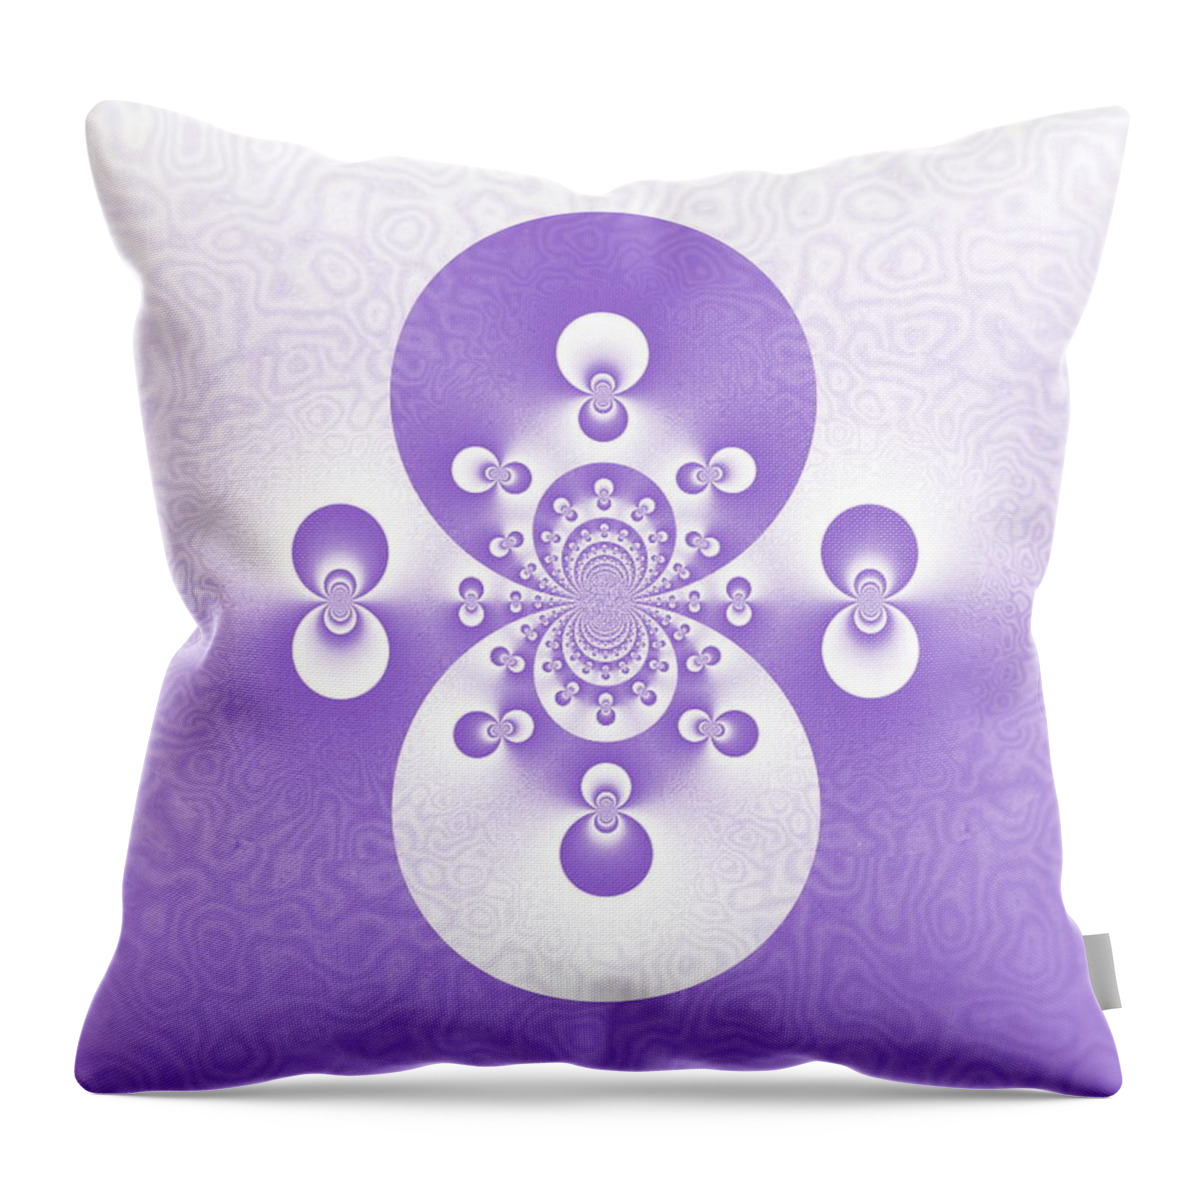 Purple Throw Pillow featuring the digital art Passionate Shadows by Designs By L